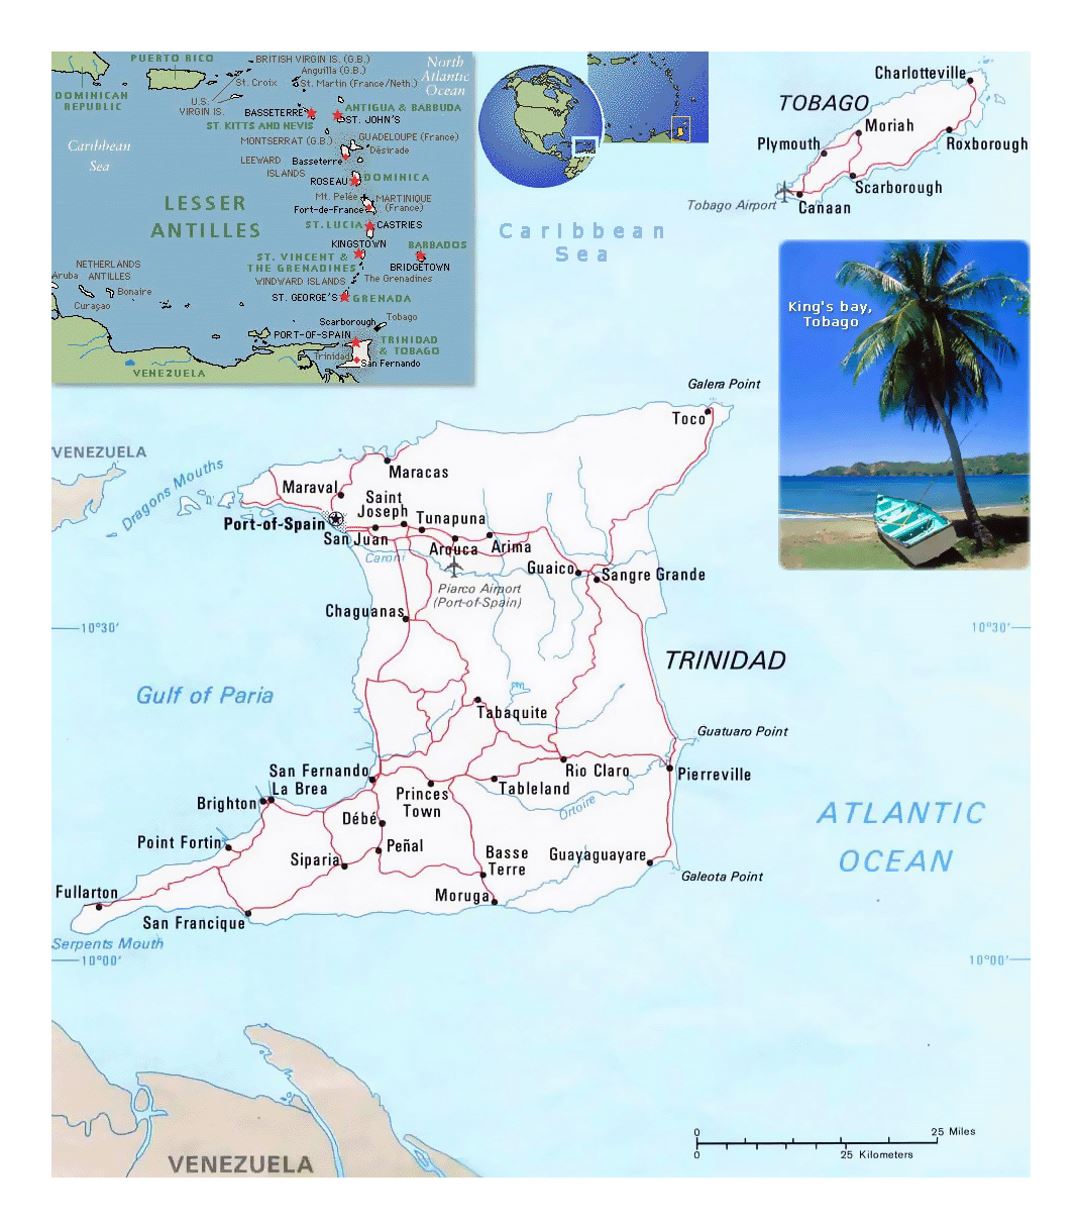 Detailed political map of Trinidad and Tobago with roads, cities and airports